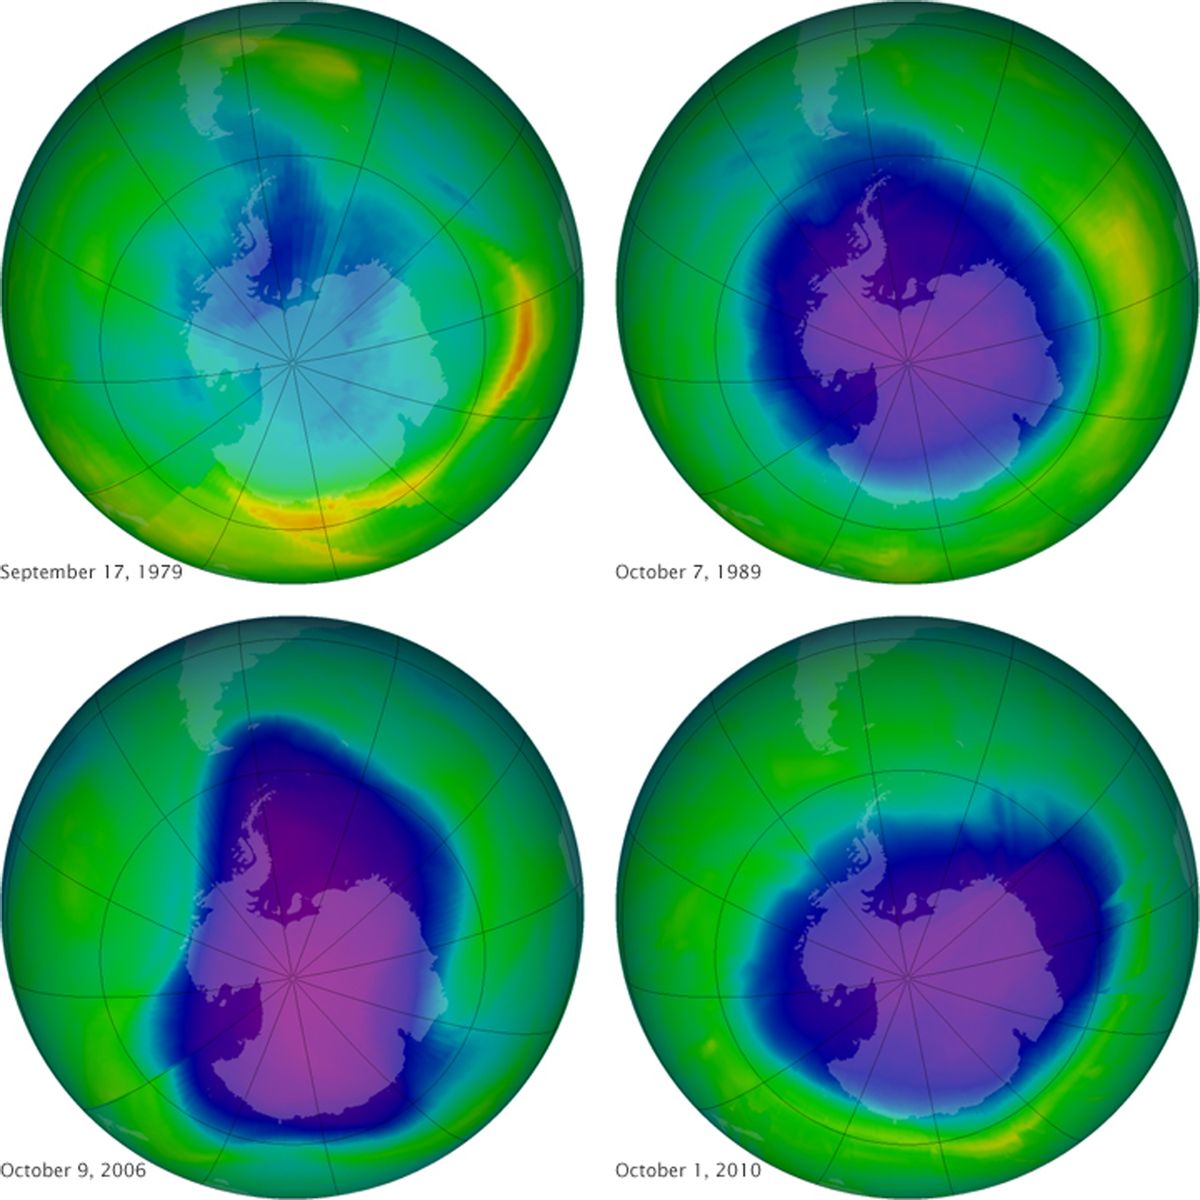 This undated image provided by NASA shows the ozone layer over the years, Sept. 17, 1979, top left, Oct. 7, 1989, top right, Oct. 9, 2006, lower left, and Oct. 1, 2010, lower right. Earth protective but fragile ozone layer is finally starting to rebound, says a United Nations panel of scientists. Scientists hail this as rare environmental good news, demonstrating that when the world comes together it can stop a brewing ecological crisis.  (AP/NASA)